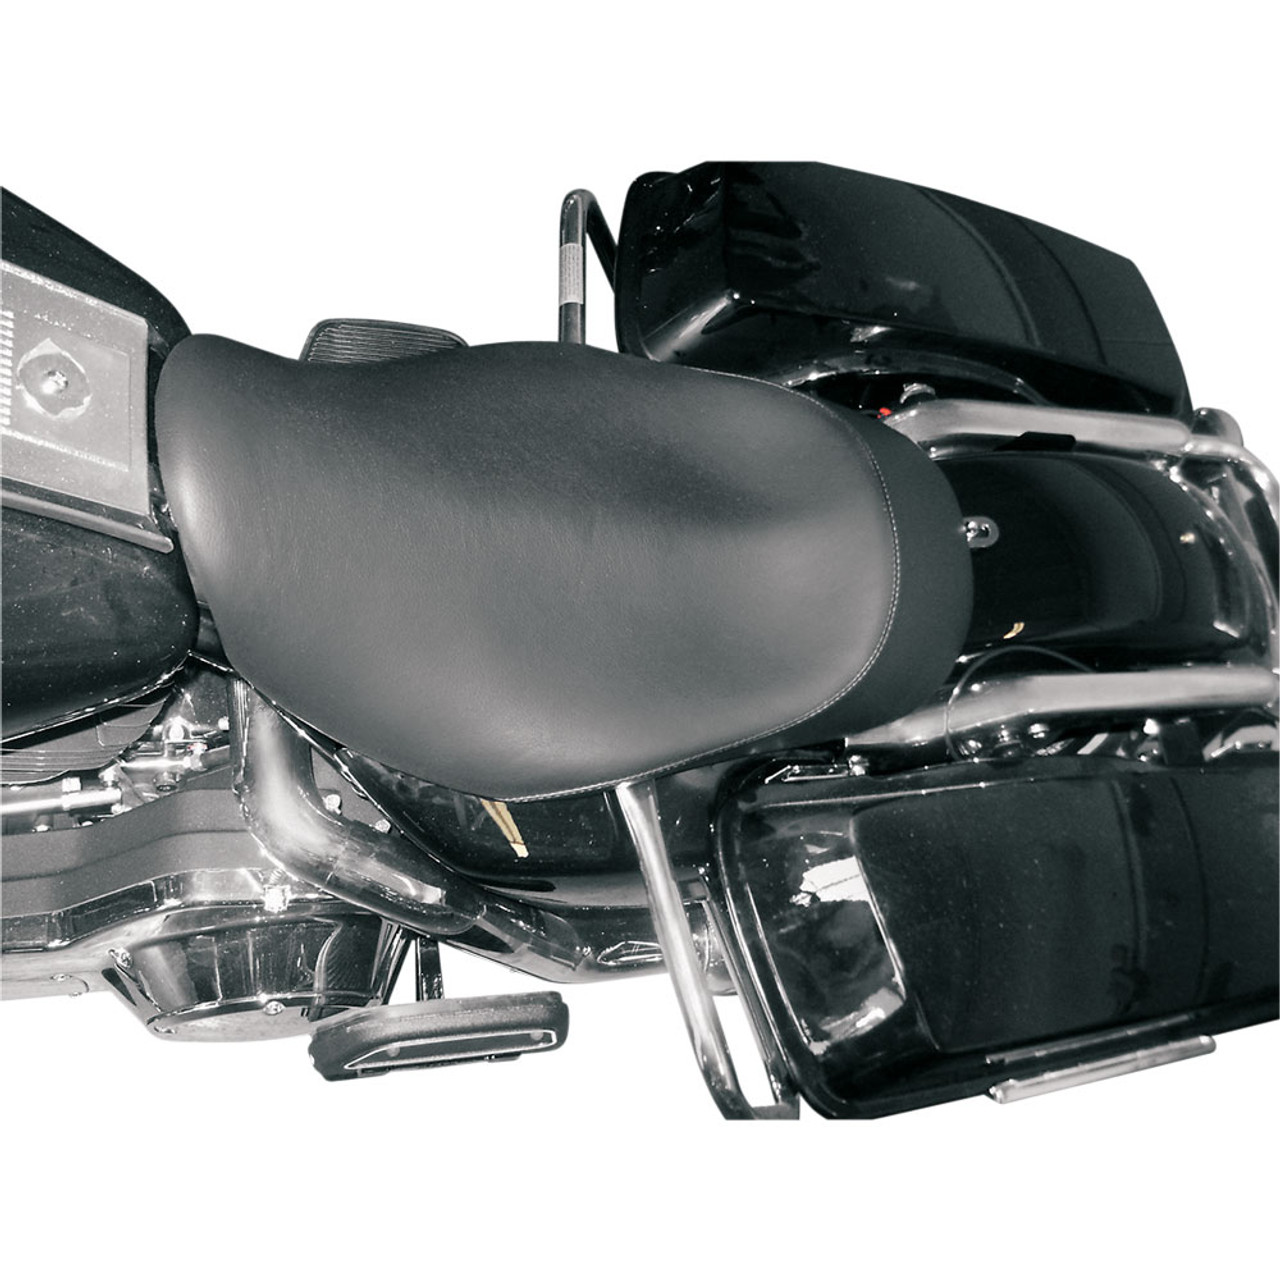 Danny Gray Buttcrack Solo Seat for 1997-2007 Harley Touring - Smooth